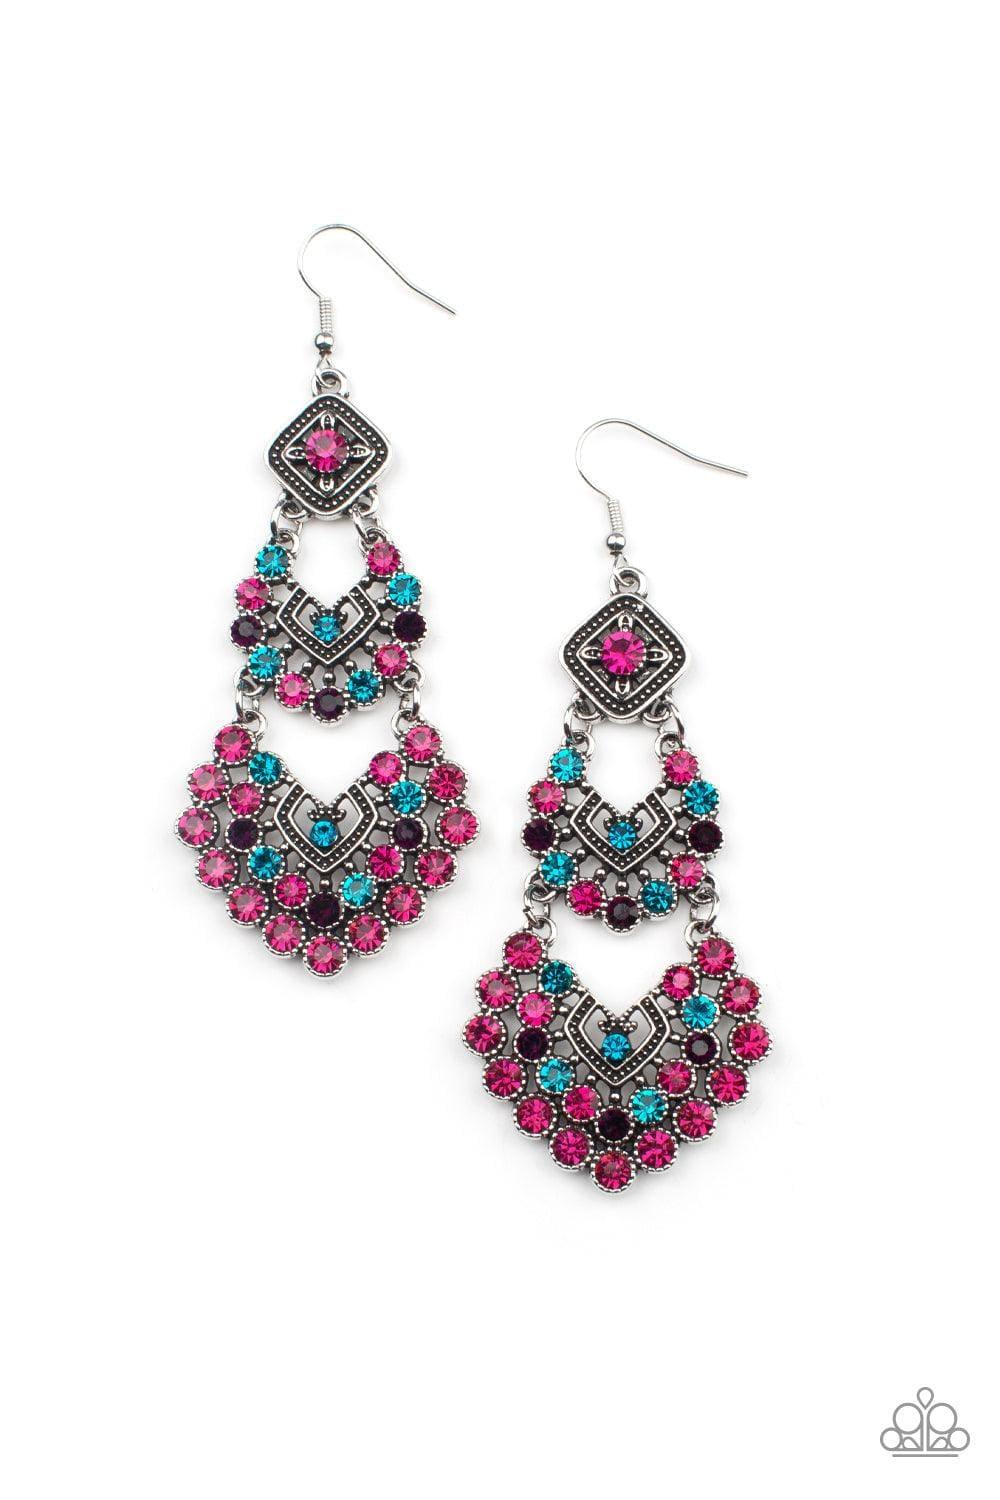 Paparazzi Accessories - All For The Glam - Multicolor Earrings - Bling by JessieK